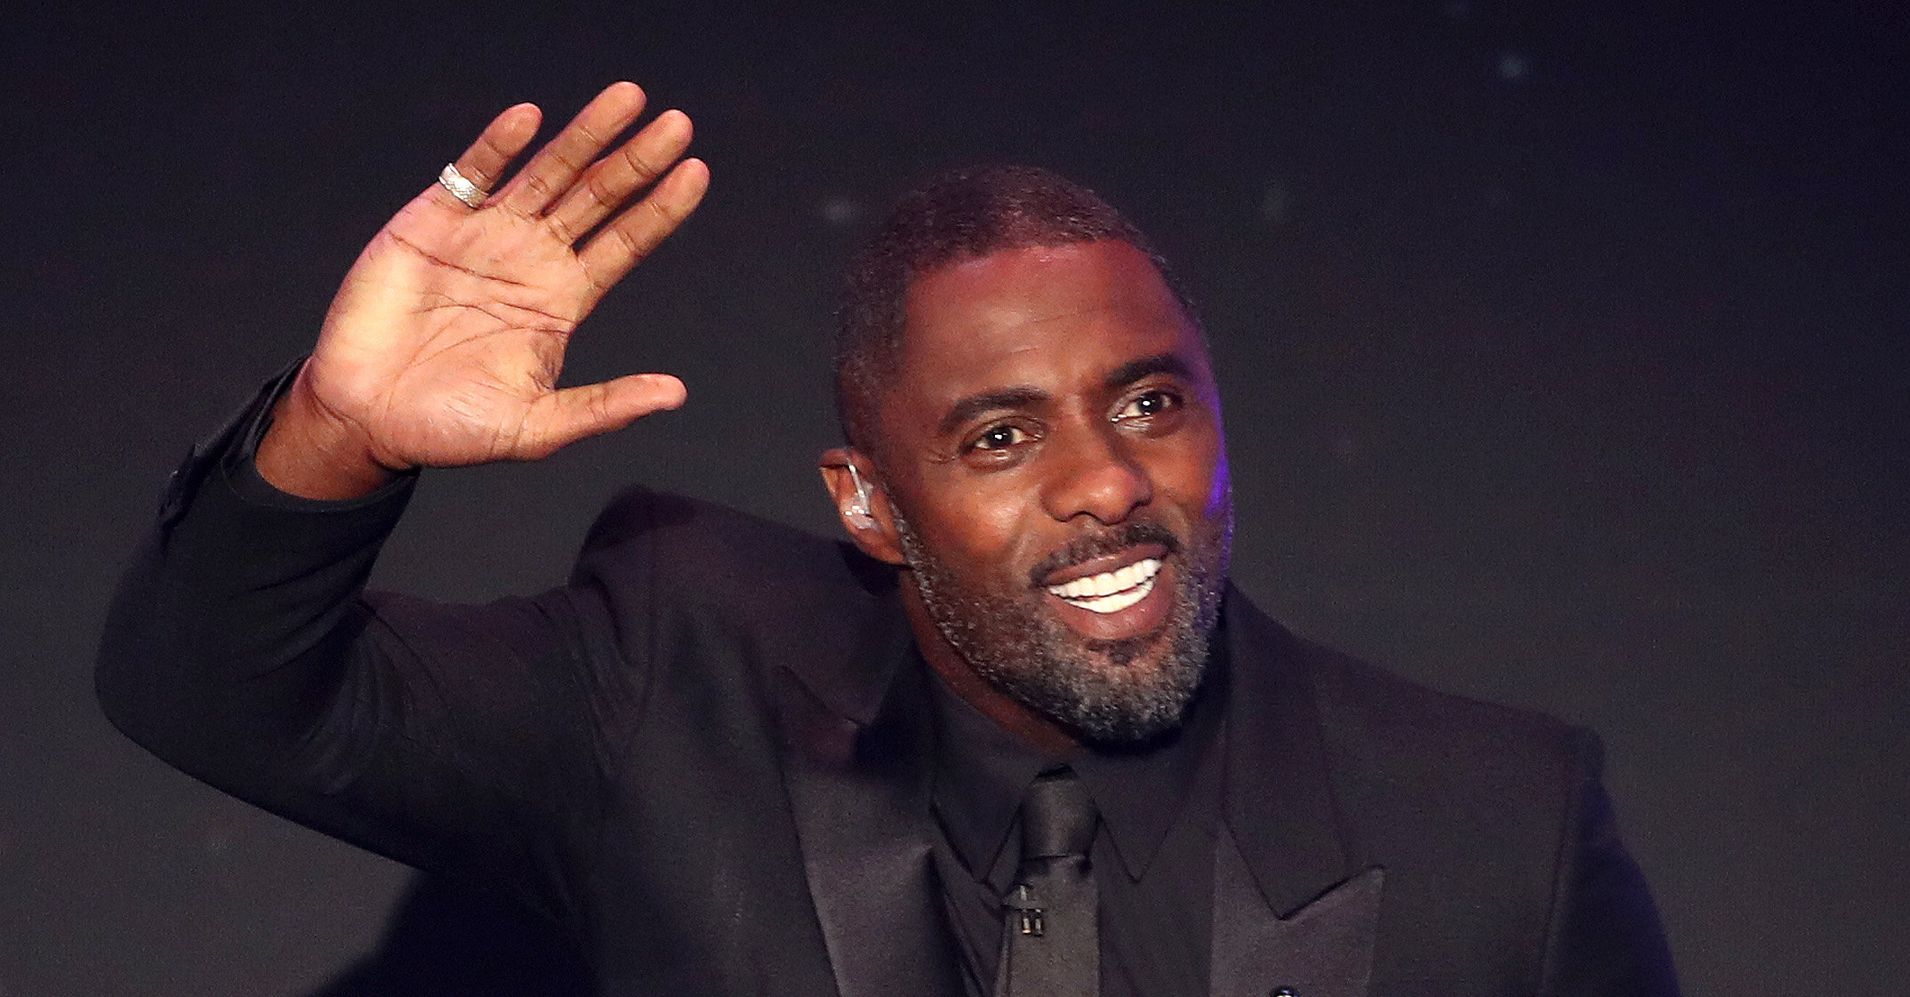 Idris Elba Will Star In 'Cats' With Taylor Swift, James Corden | HuffPost